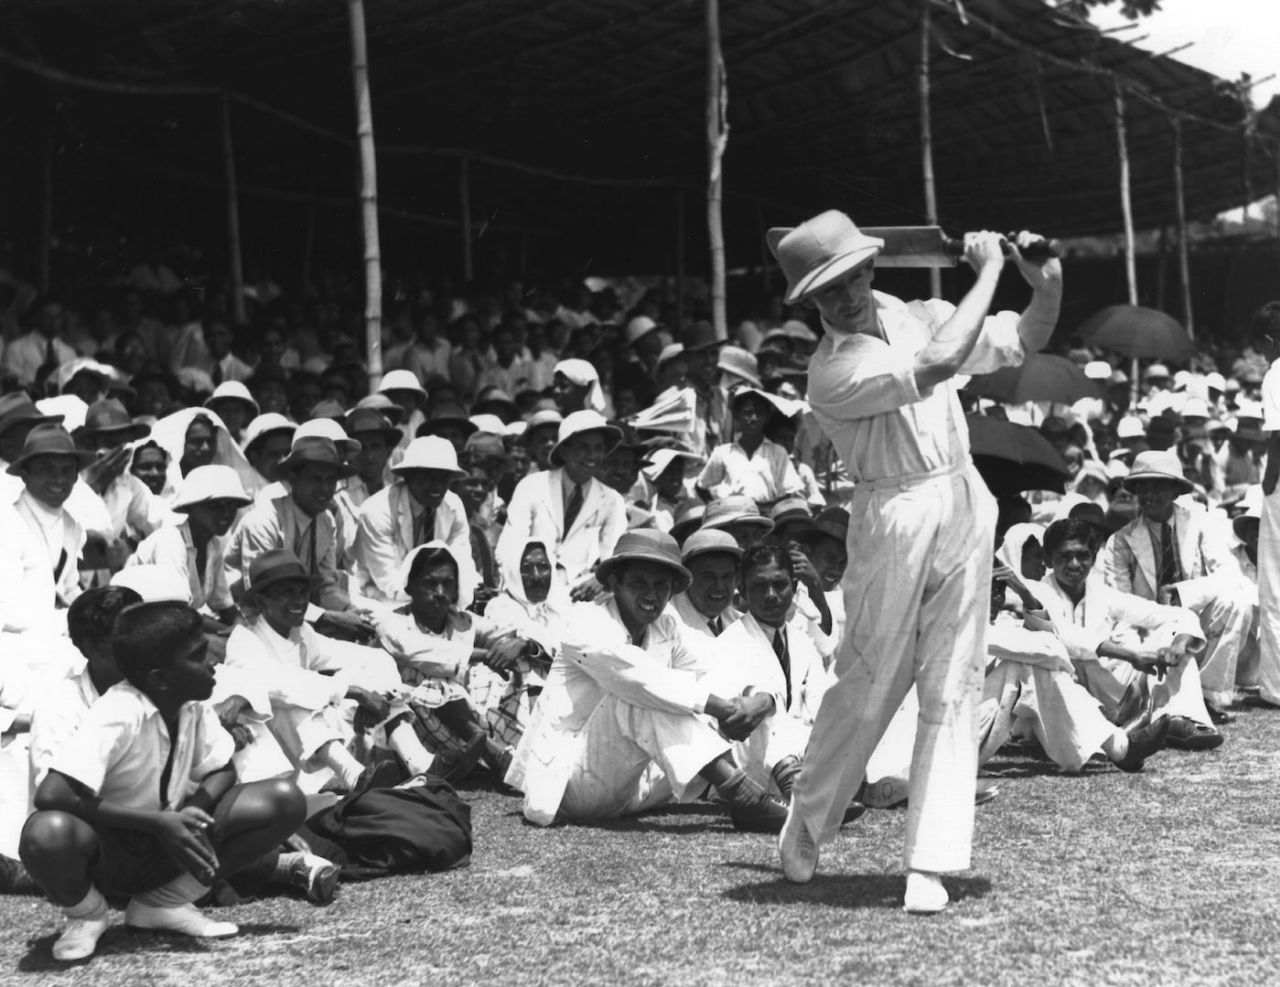 Australian cricketer Lindsay Hassett practising before a match at Colombo, in front of a crowd of spectators, April 6, 1938